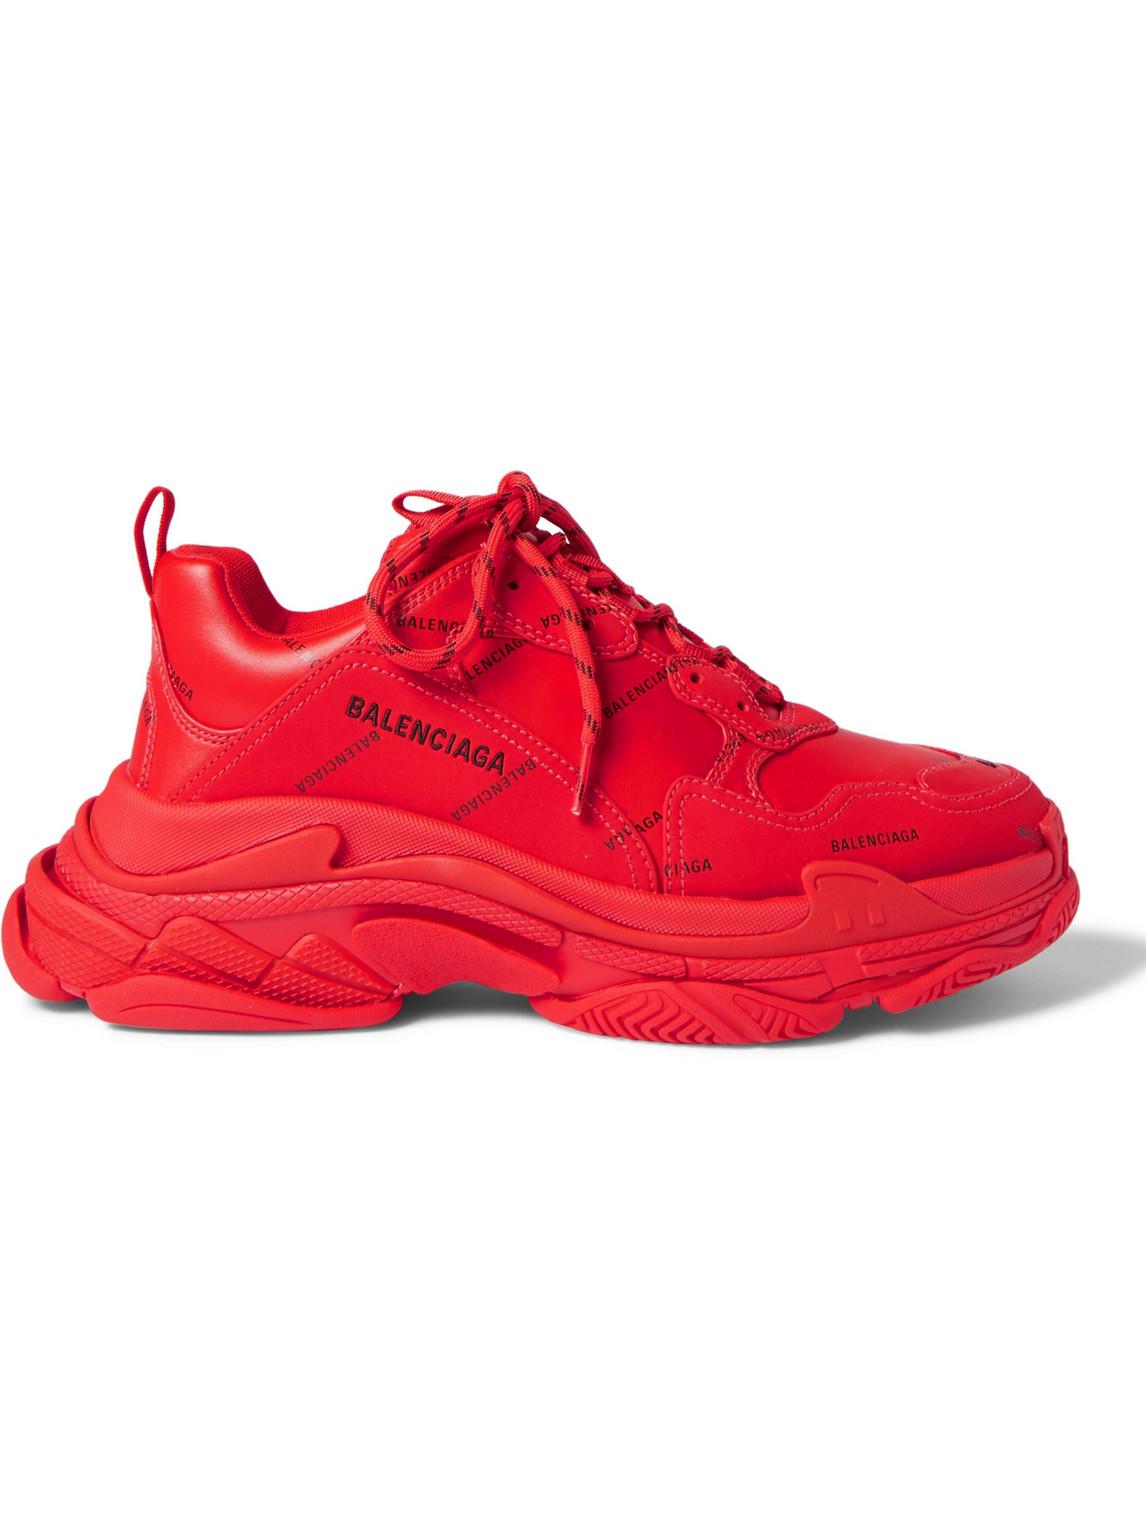 Balenciaga Synthetic Triple S Clear Sole Sneaker in Red/Black (Red) for Men  | Lyst